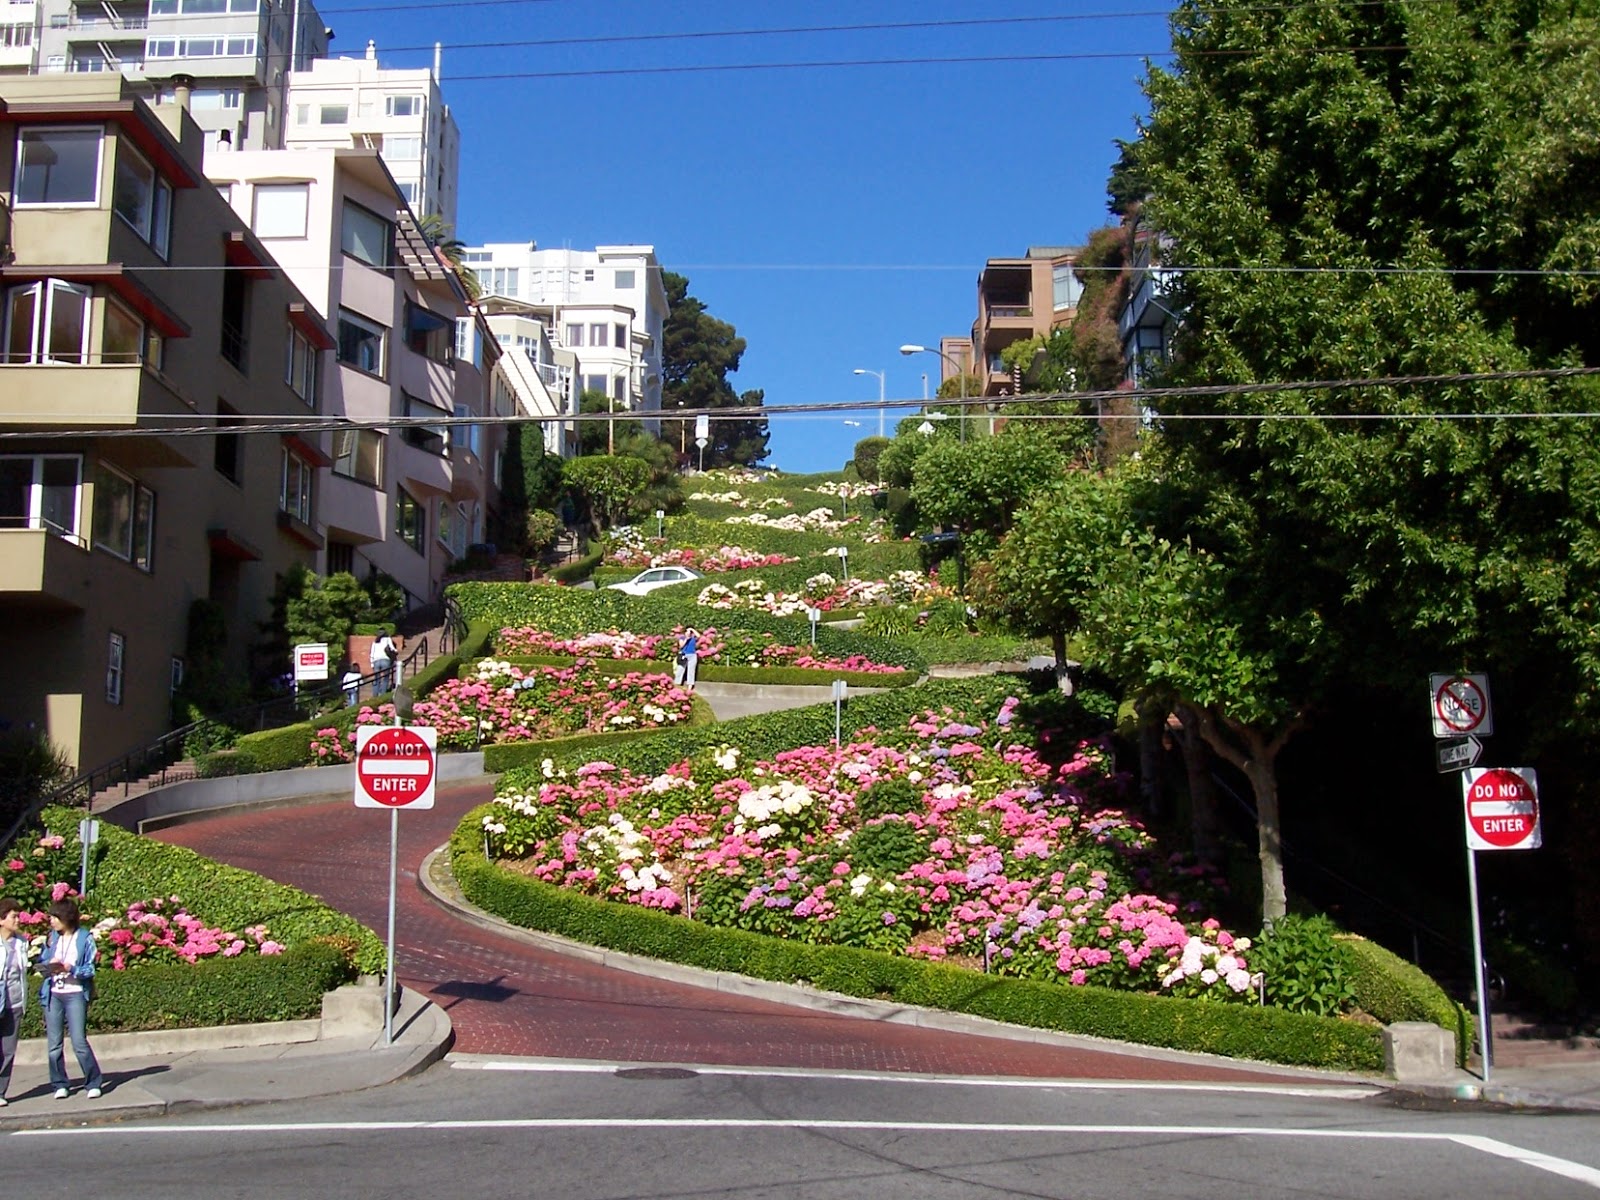 his-and-her-hobbies-his-and-her-travel-review-lombard-street-san